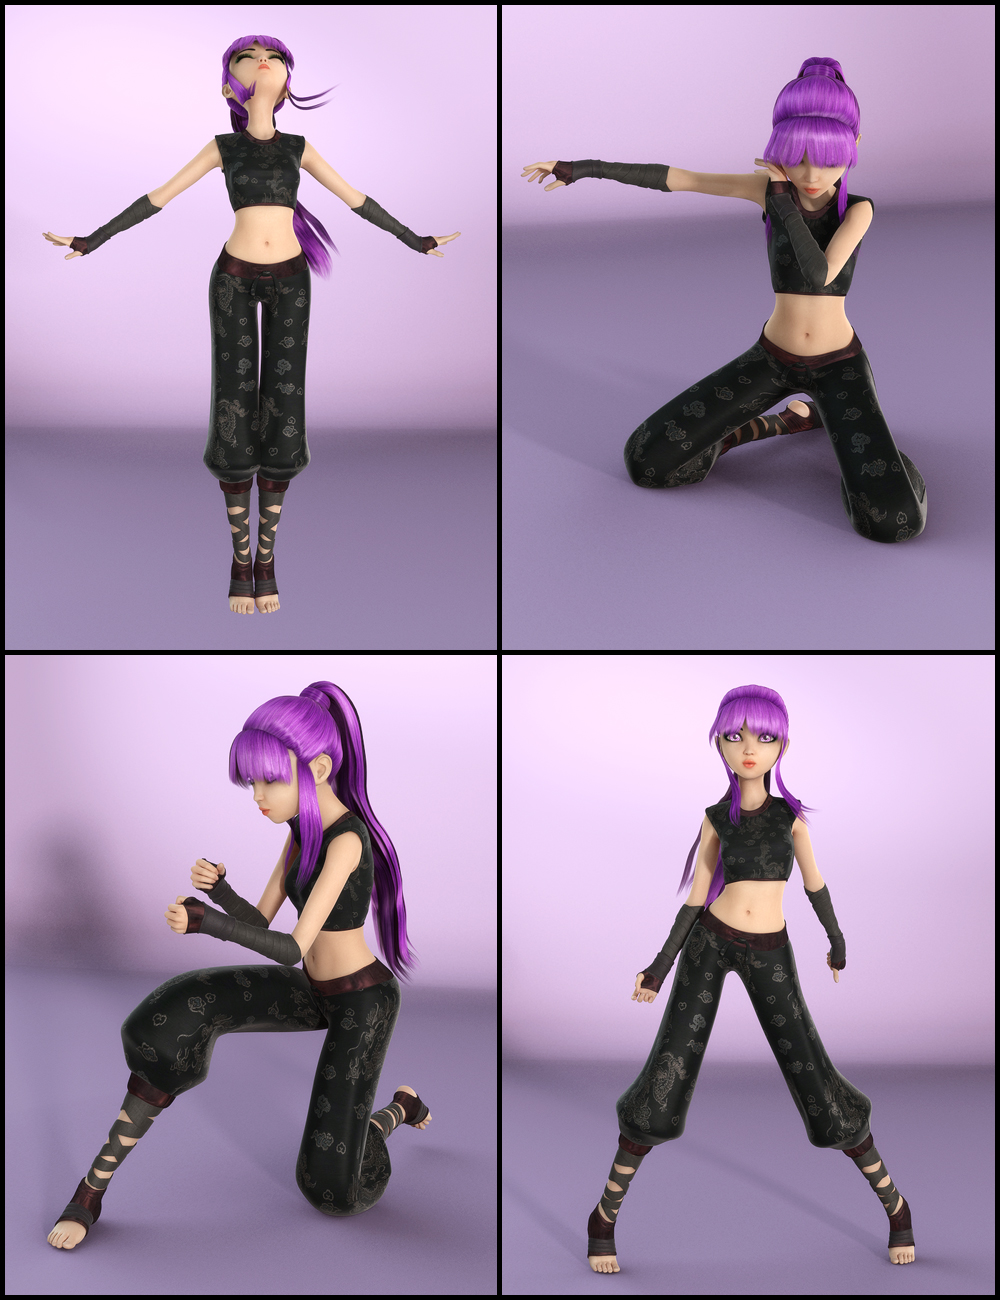 i13 Manga Style by: ironman13, 3D Models by Daz 3D